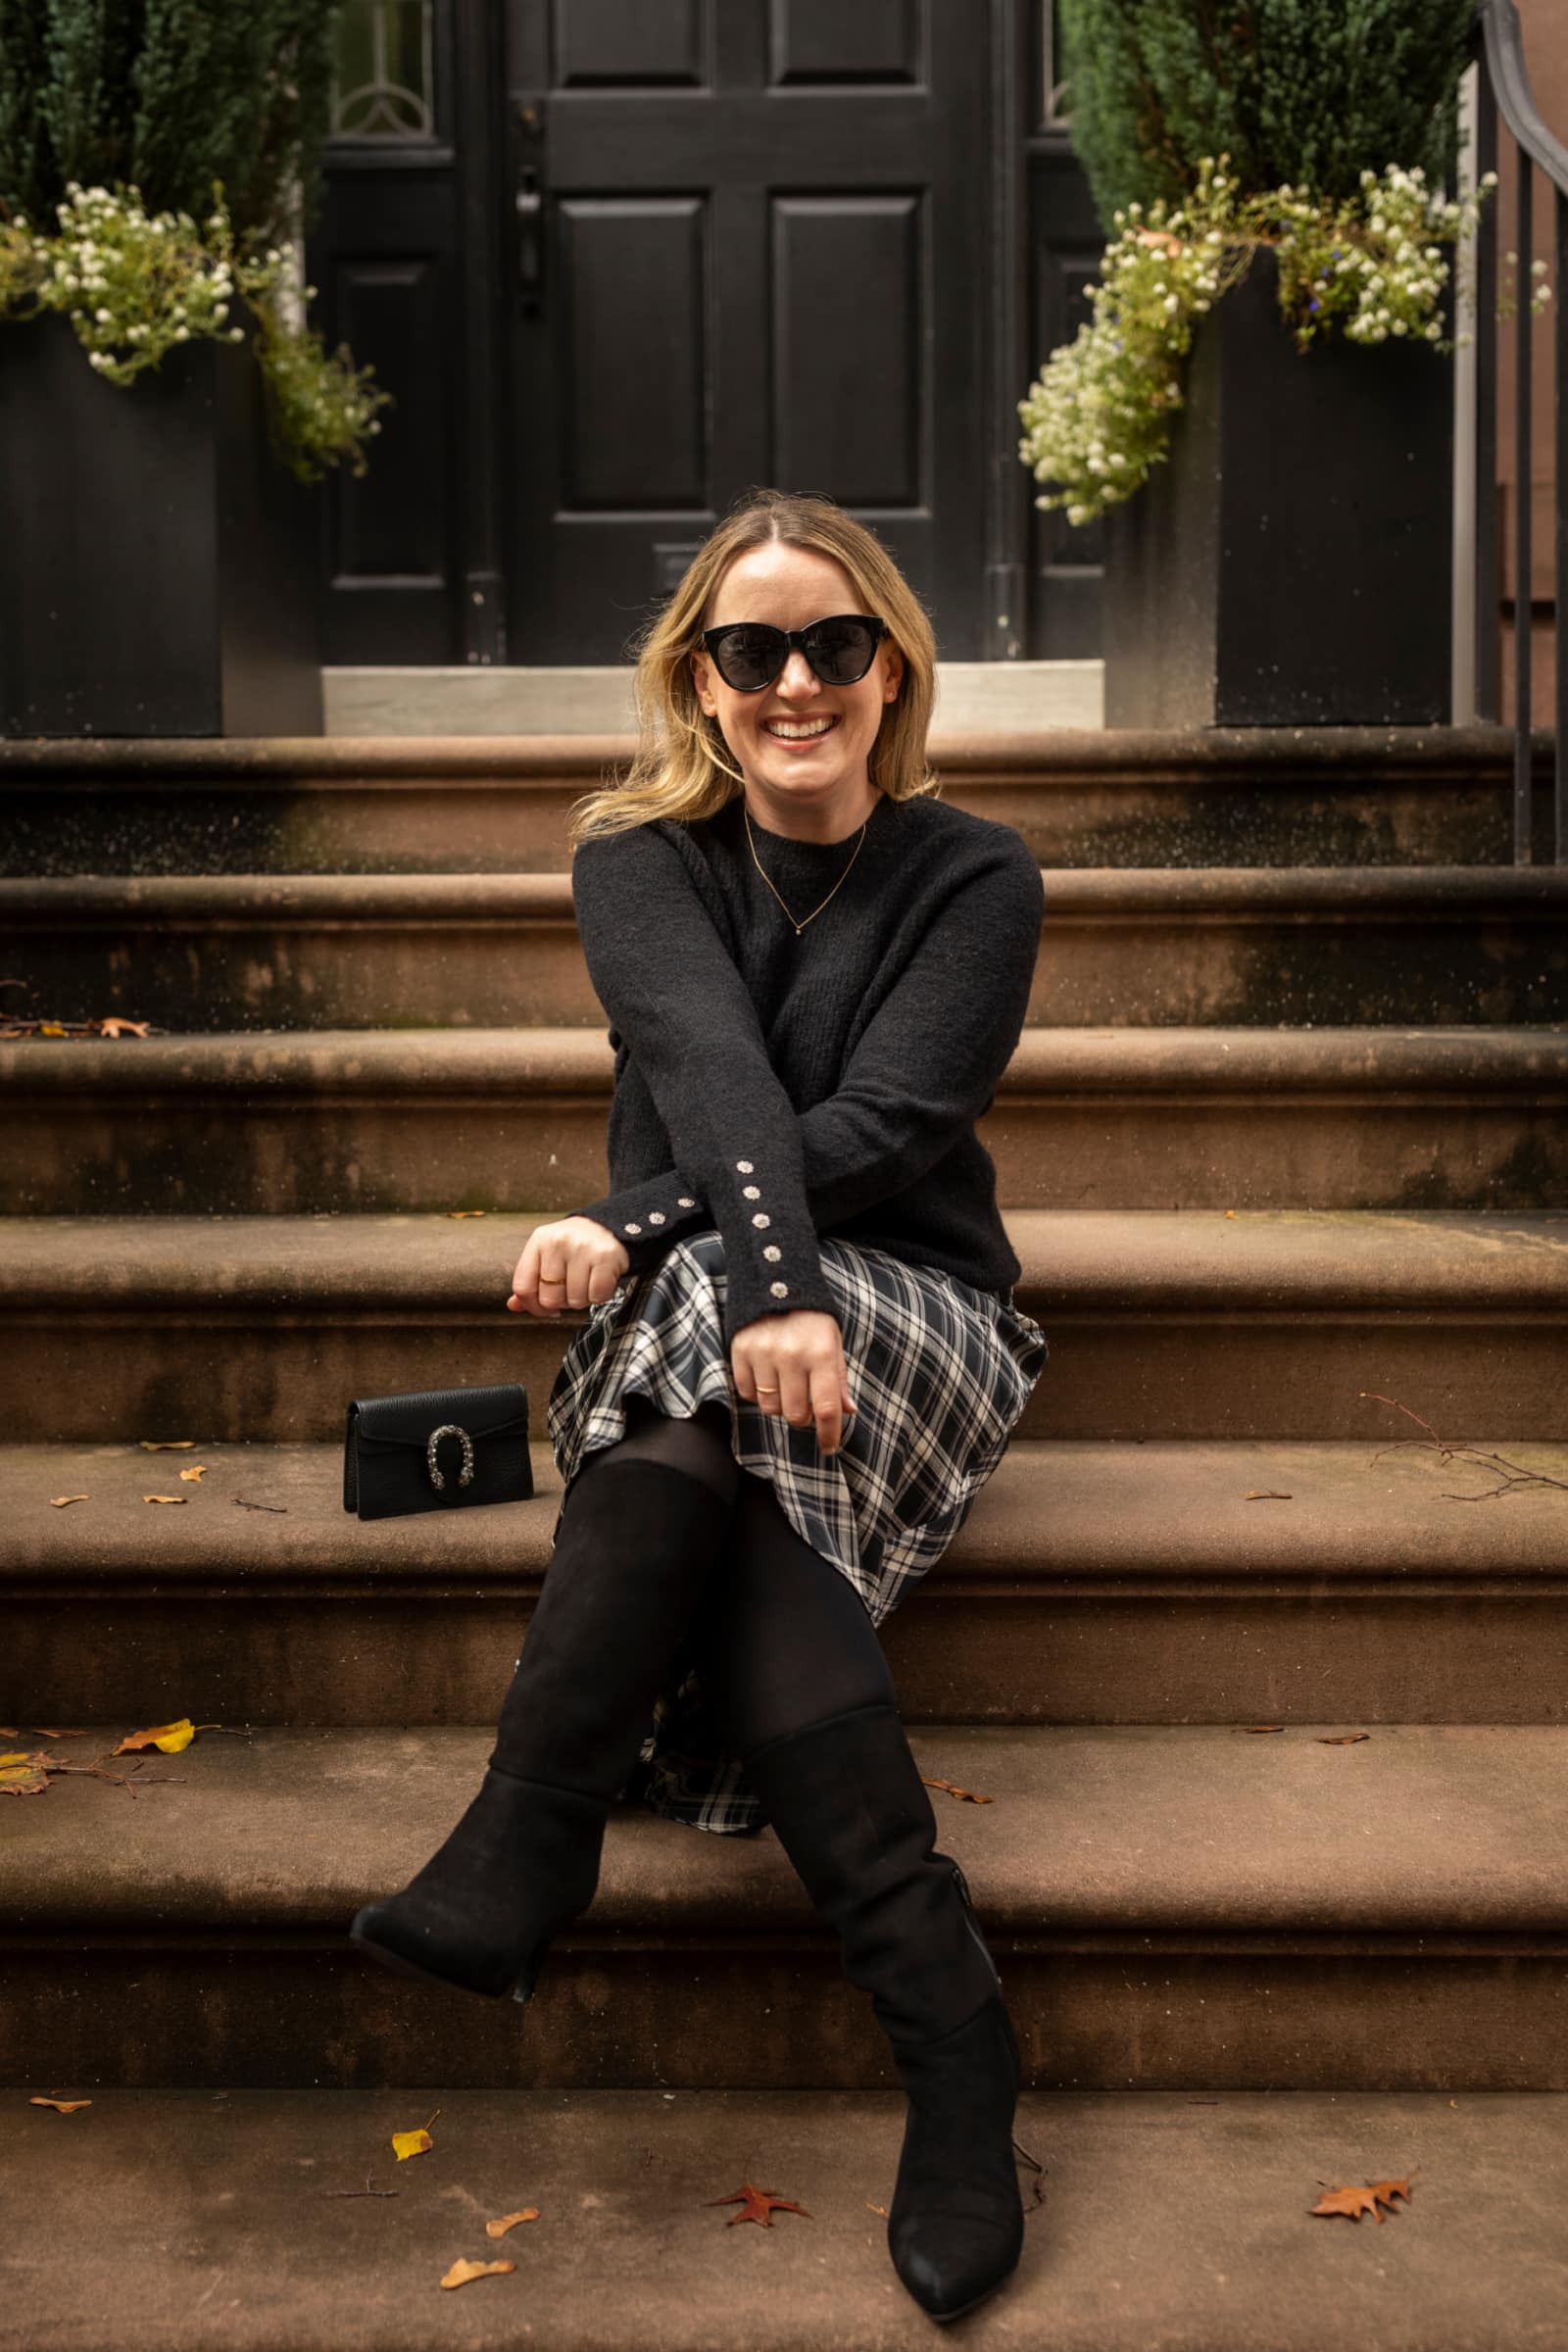 The Best Dress Pants of 2019: MM. LaFleur, Boden, J.Crew, and More